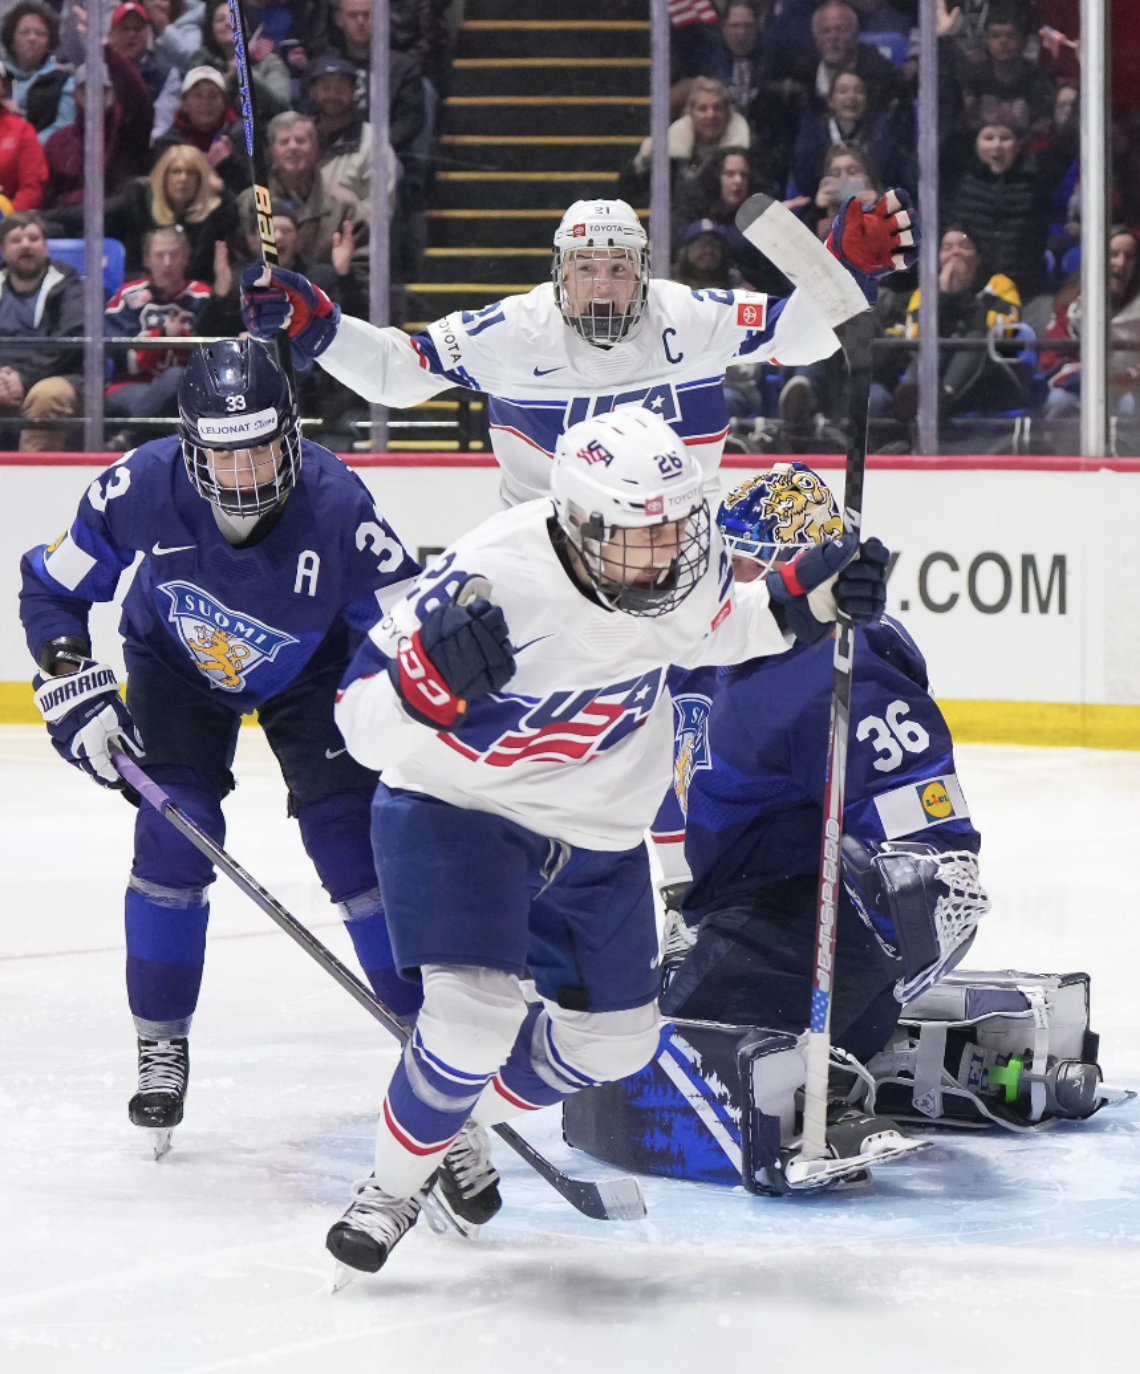 Coyne Schofield pumps her fists and yells in celebration of her goal, while an elated Hilary Knight raises her arms and yells in the background..